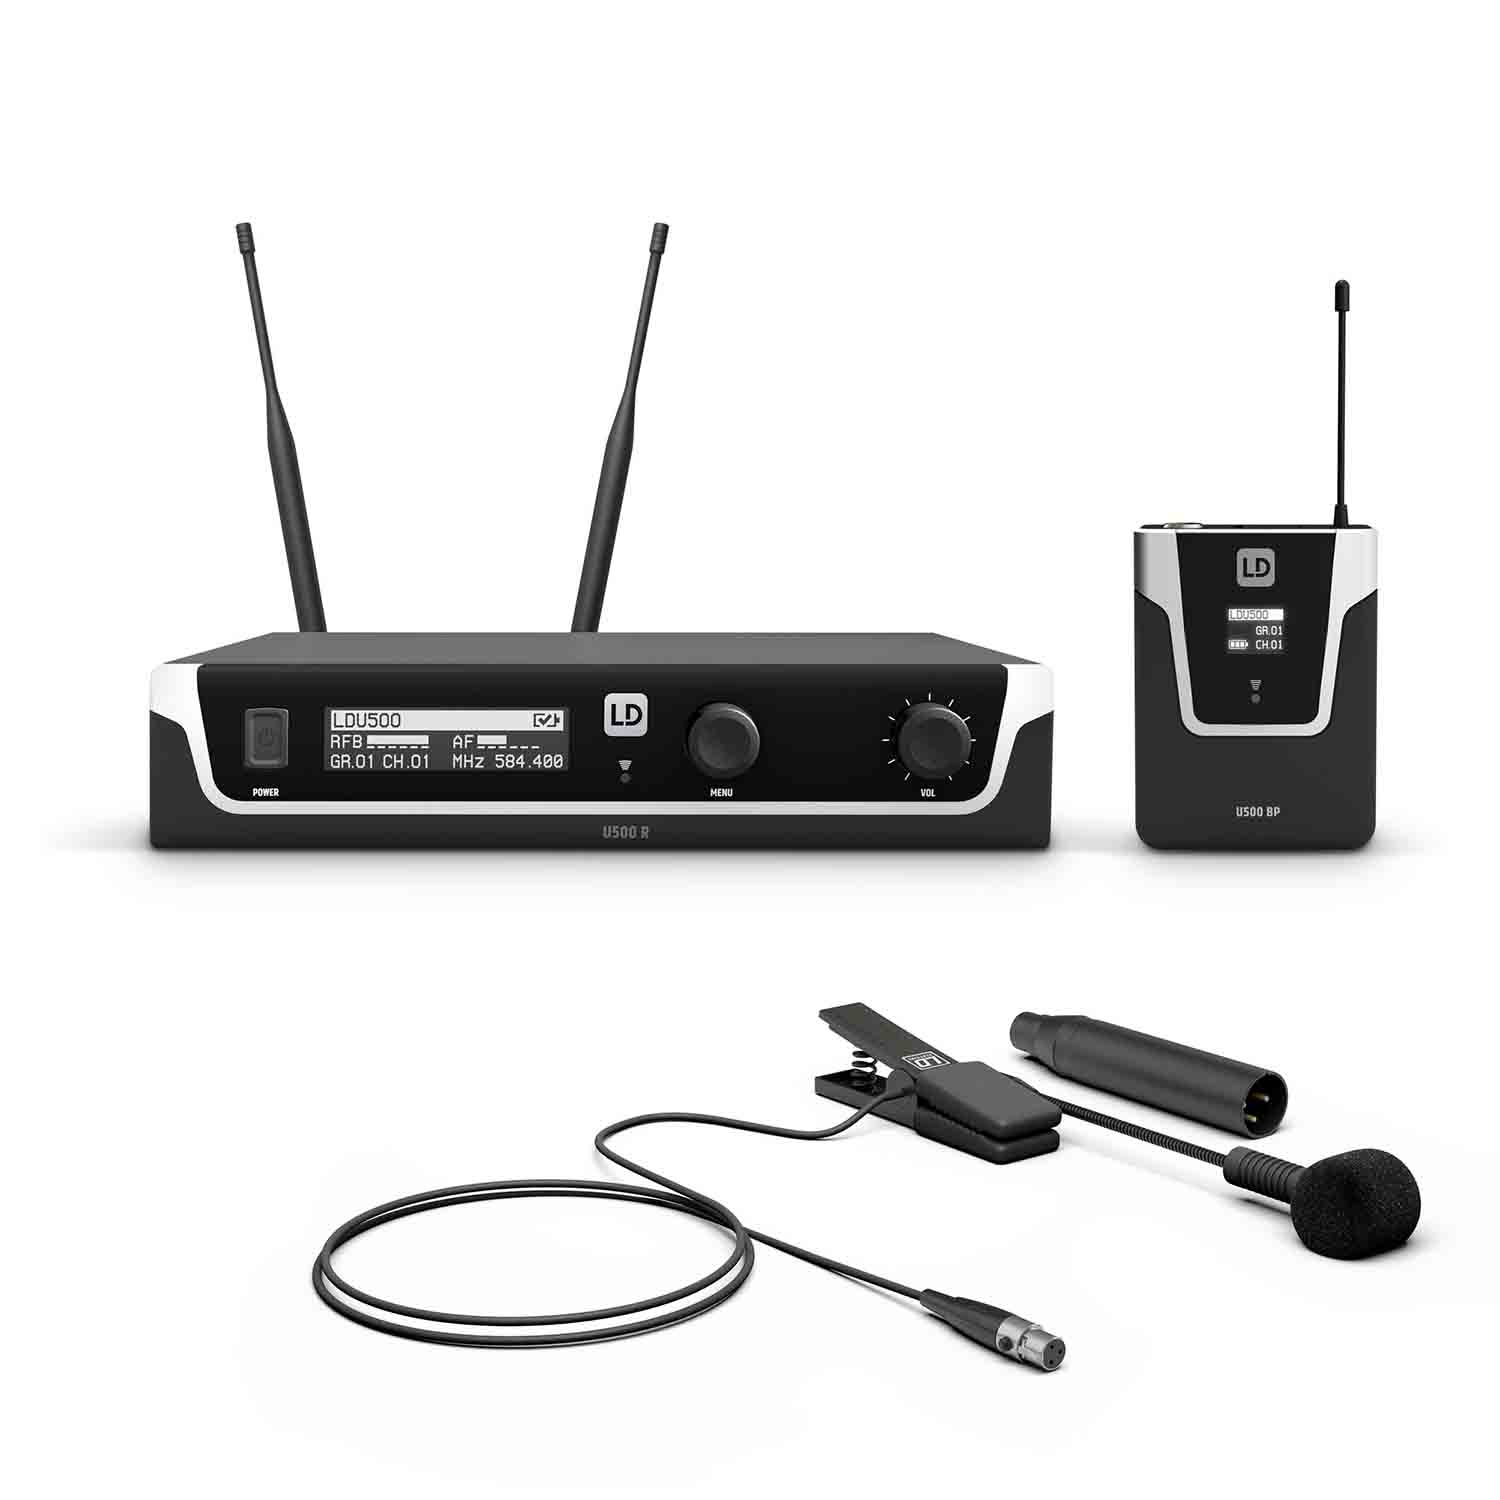 LD Systems U505 BPW Wireless Microphone System with Bodypack and Brass Instrument Microphone (584 – 608 MHz) - Hollywood DJ